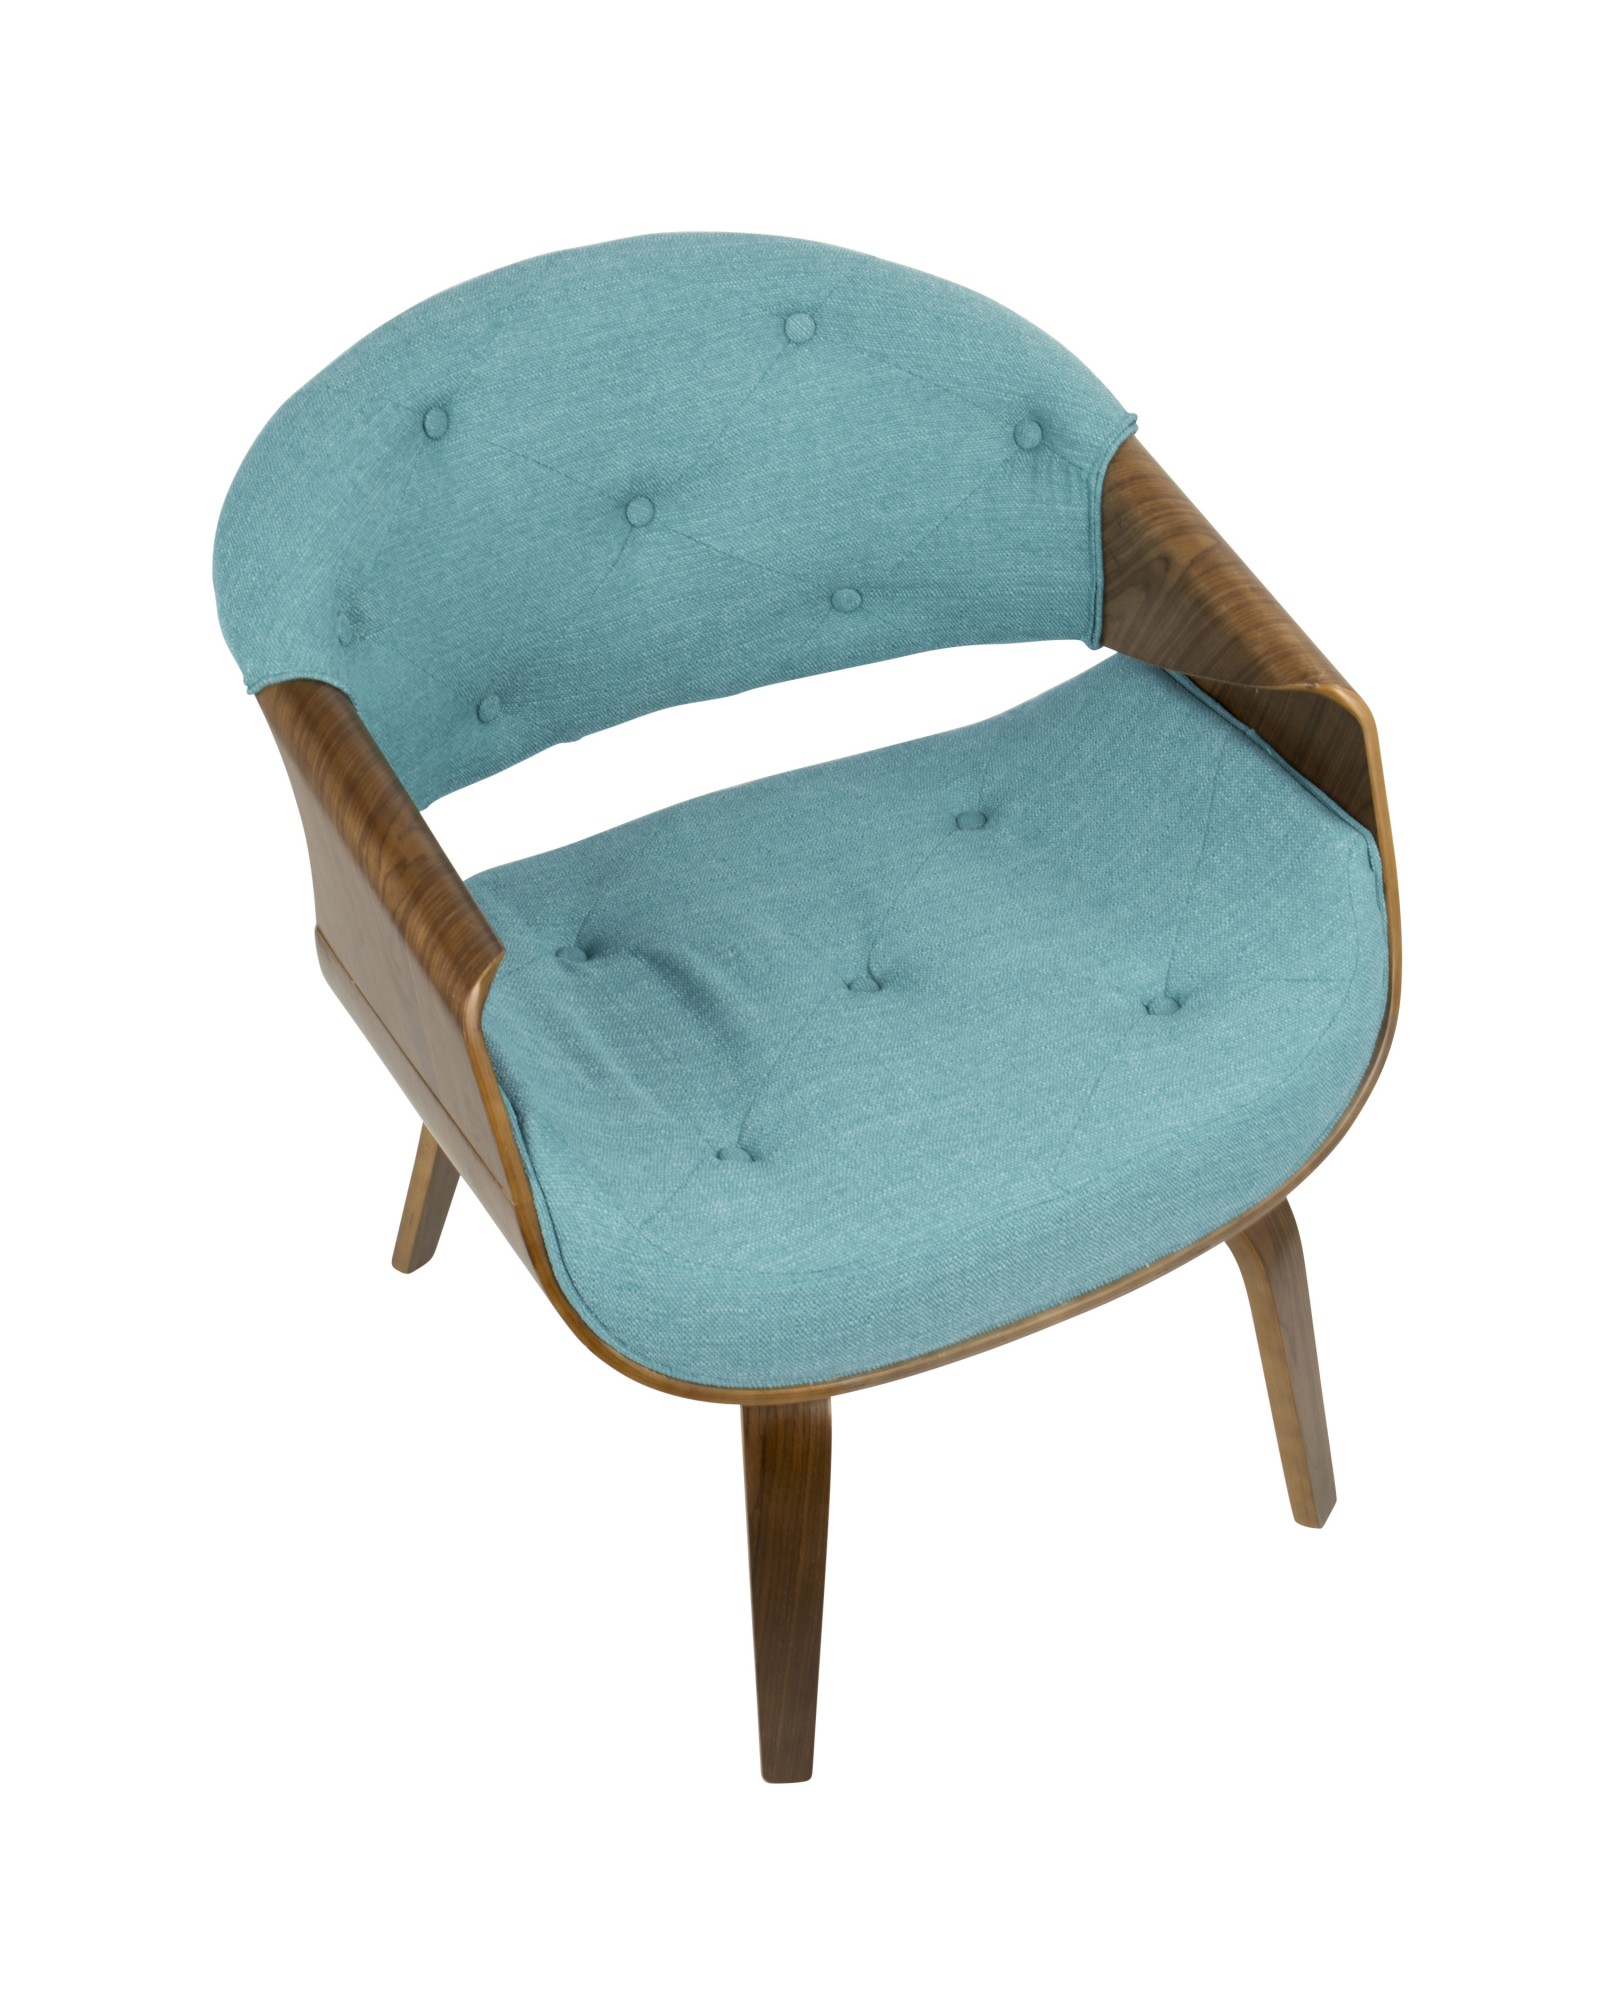 Curvo Mid-Century Modern Tufted Accent Chair in Walnut and Teal Fabric